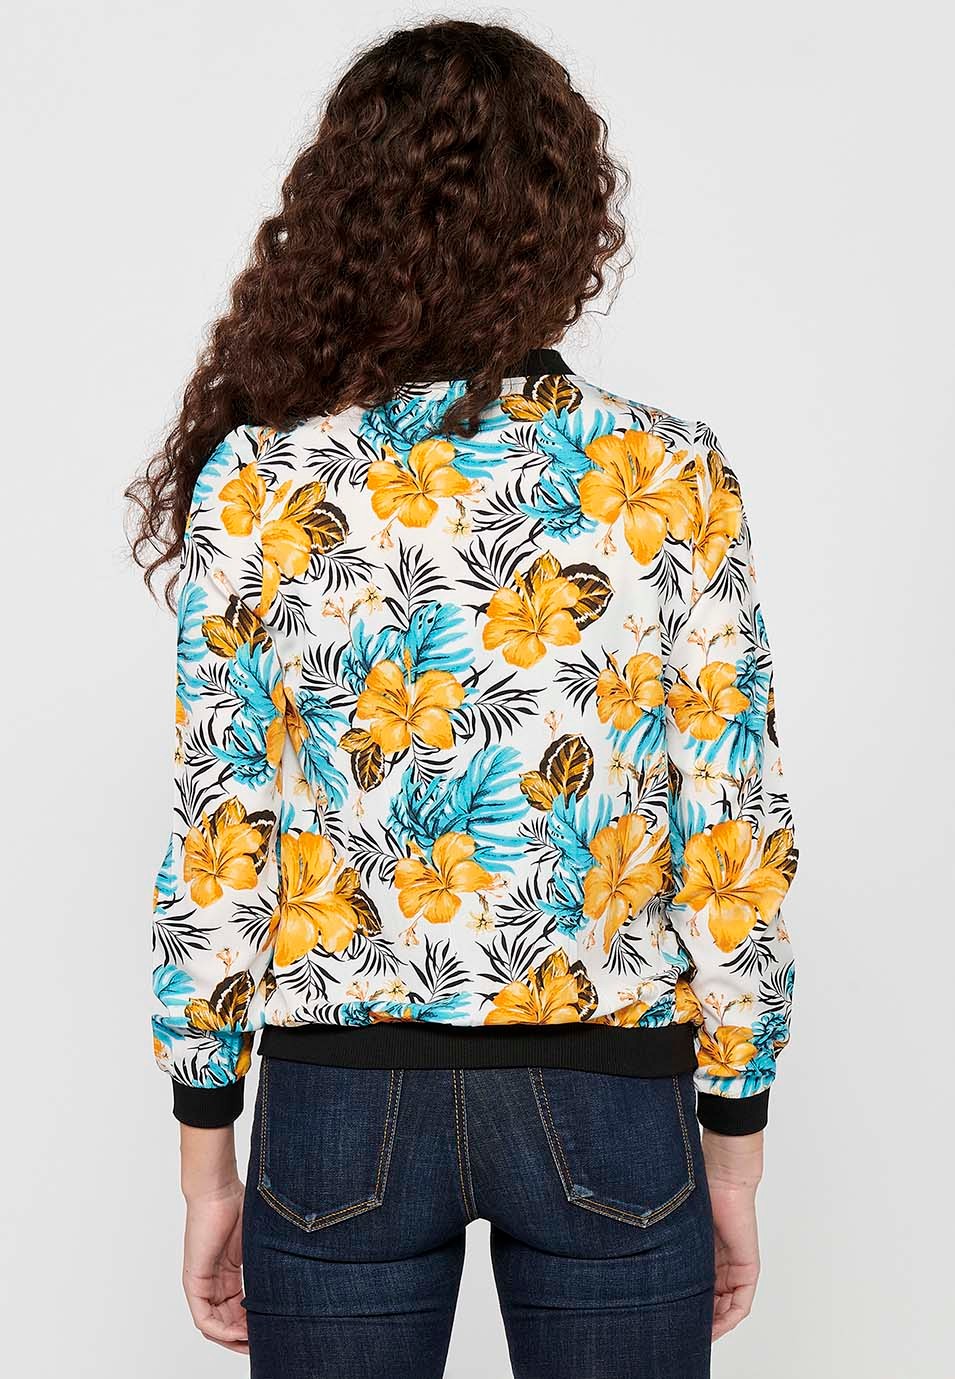 Long-sleeved sweatshirt jacket with ribbed finishes and floral print with front zipper closure. Composition 100% Polyester. White Color for Women from the Koröshi brand 2